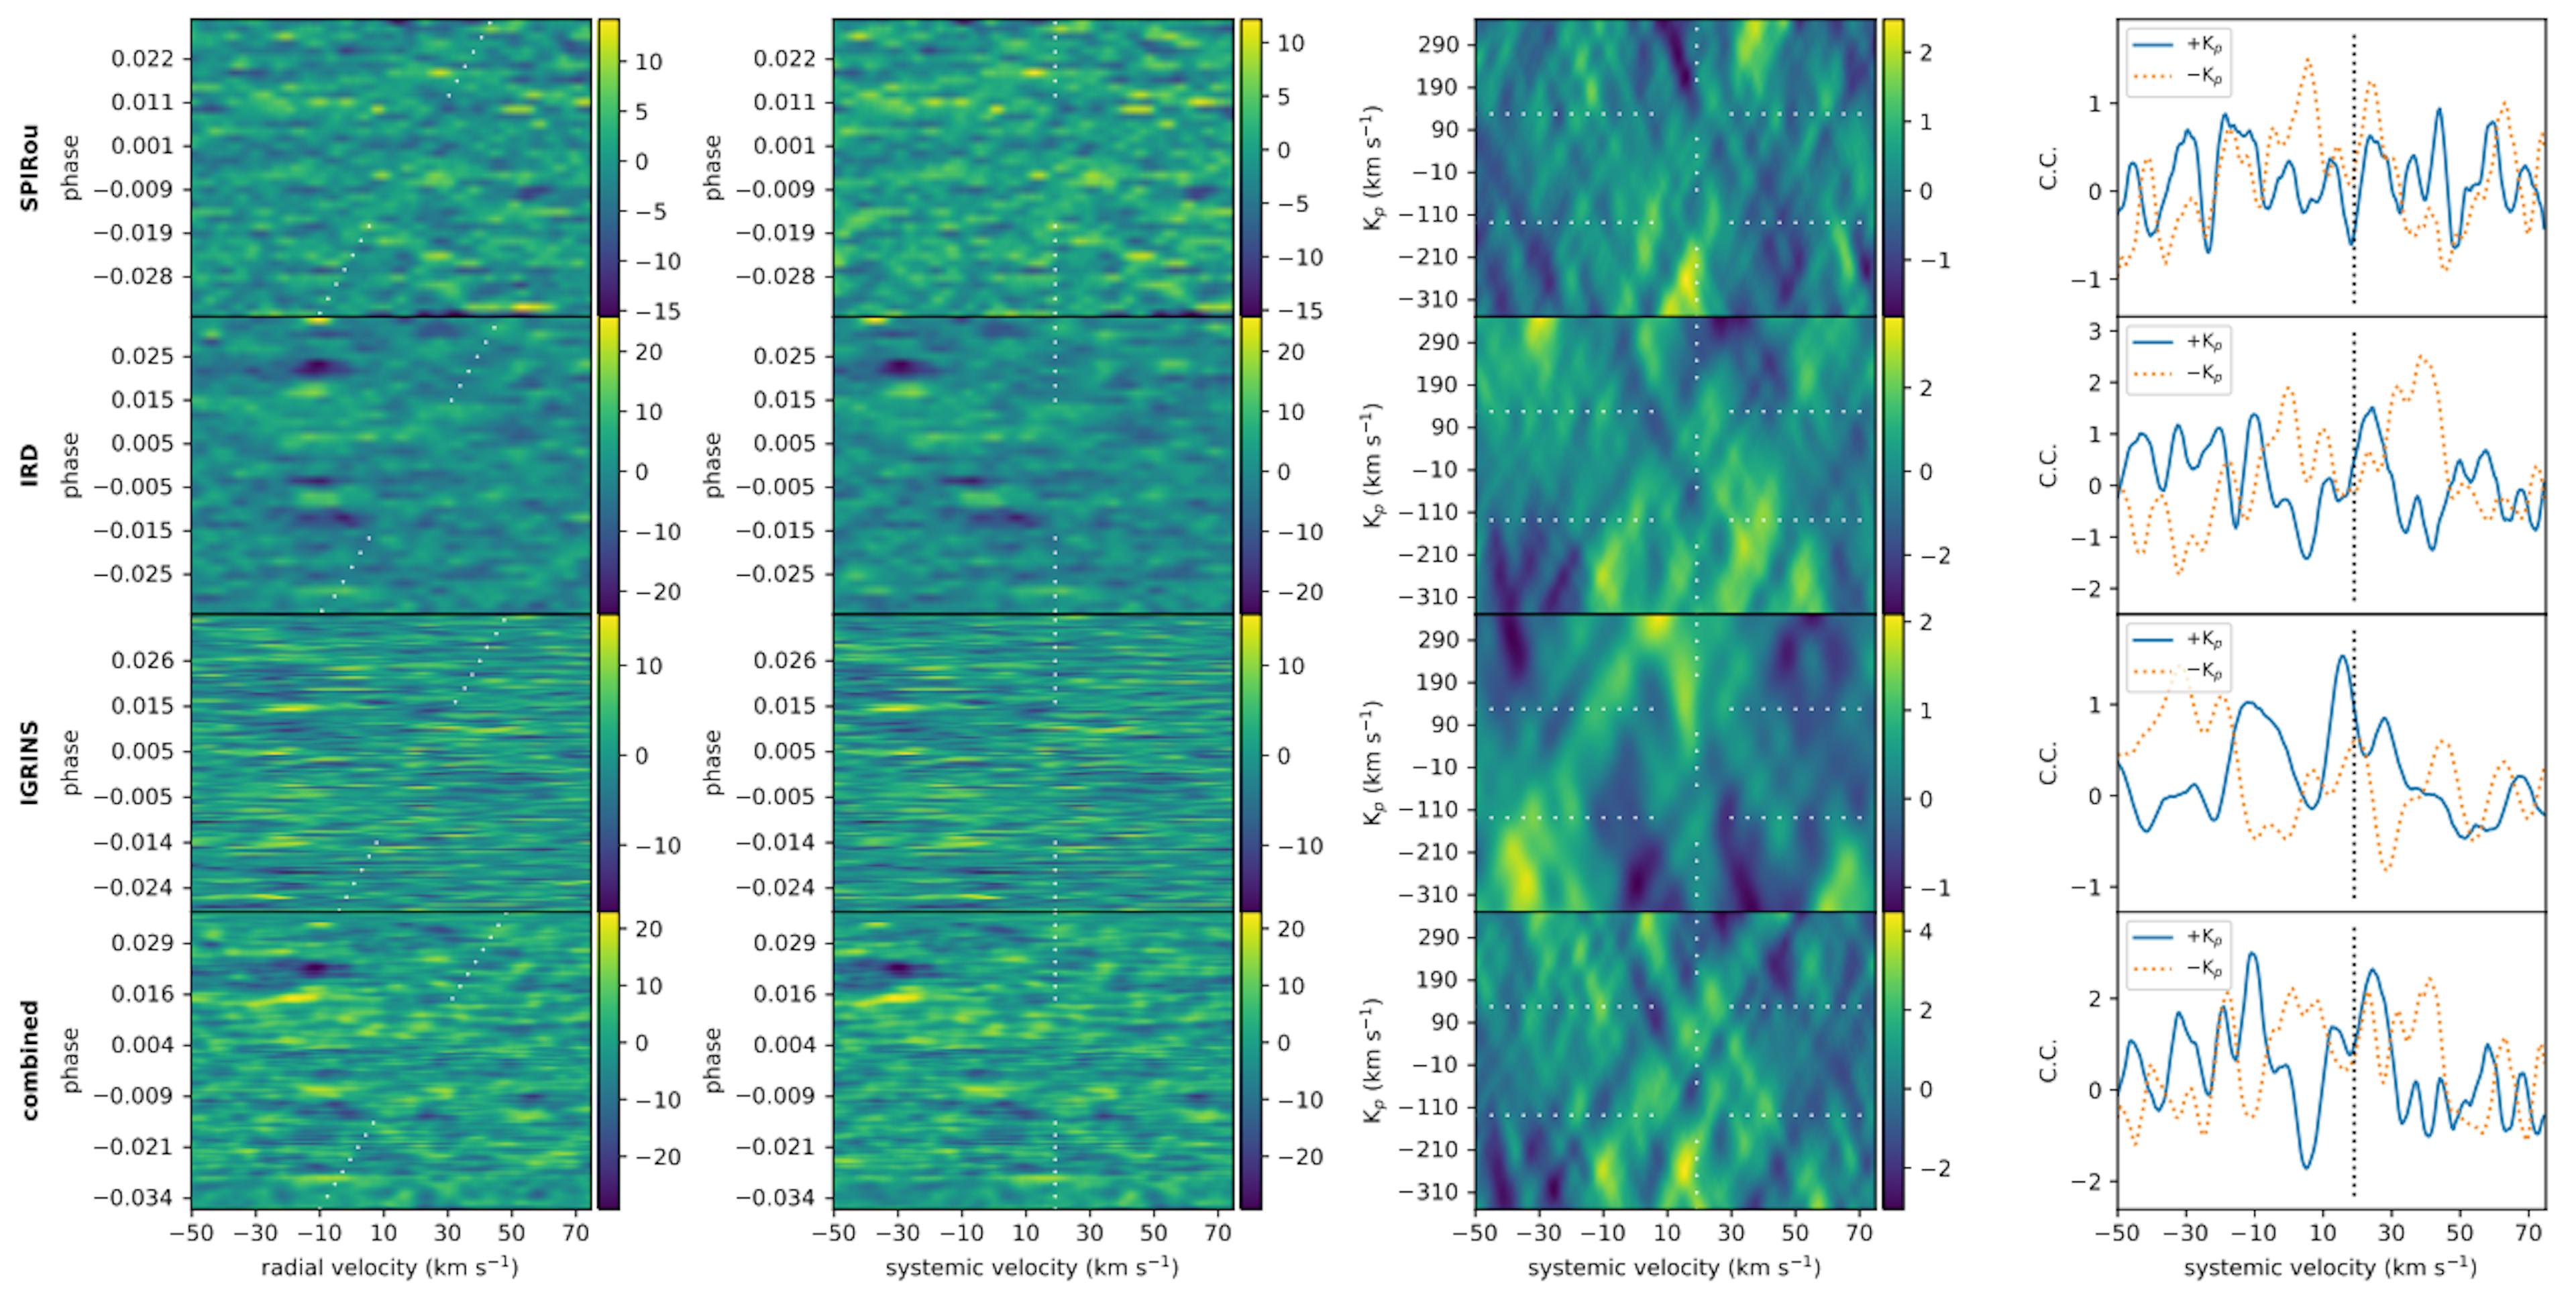 Figure 2. The results of cross-correlating the SPIRou (first row), IRD (second row), and IGRINS (third row) data sets with a model transmission spectrum containing spectral lines only from H2O. The bottom row shows the result of combining all data sets together. The first column shows the cross-correlation for each frame in the barycentric frame. The expected trace of the planet’s signal is shown as the dotted diagonal line. The second column shows the cross-correlation for each frame in the planet’s rest frame. The dotted line shows the expected trace of the planet’s signal at the system’s systemic velocity. The third column shows the phase-folded cross-correlation signal as a function of phase. The dotted horizontal and vertical lines show the planet’s expected position in ±KP and systemic velocity, respectively. The fourth column shows the 1D cross correlation as a function of systemic velocity at ±KP. The black dotted line indicates the system’s systemic velocity.